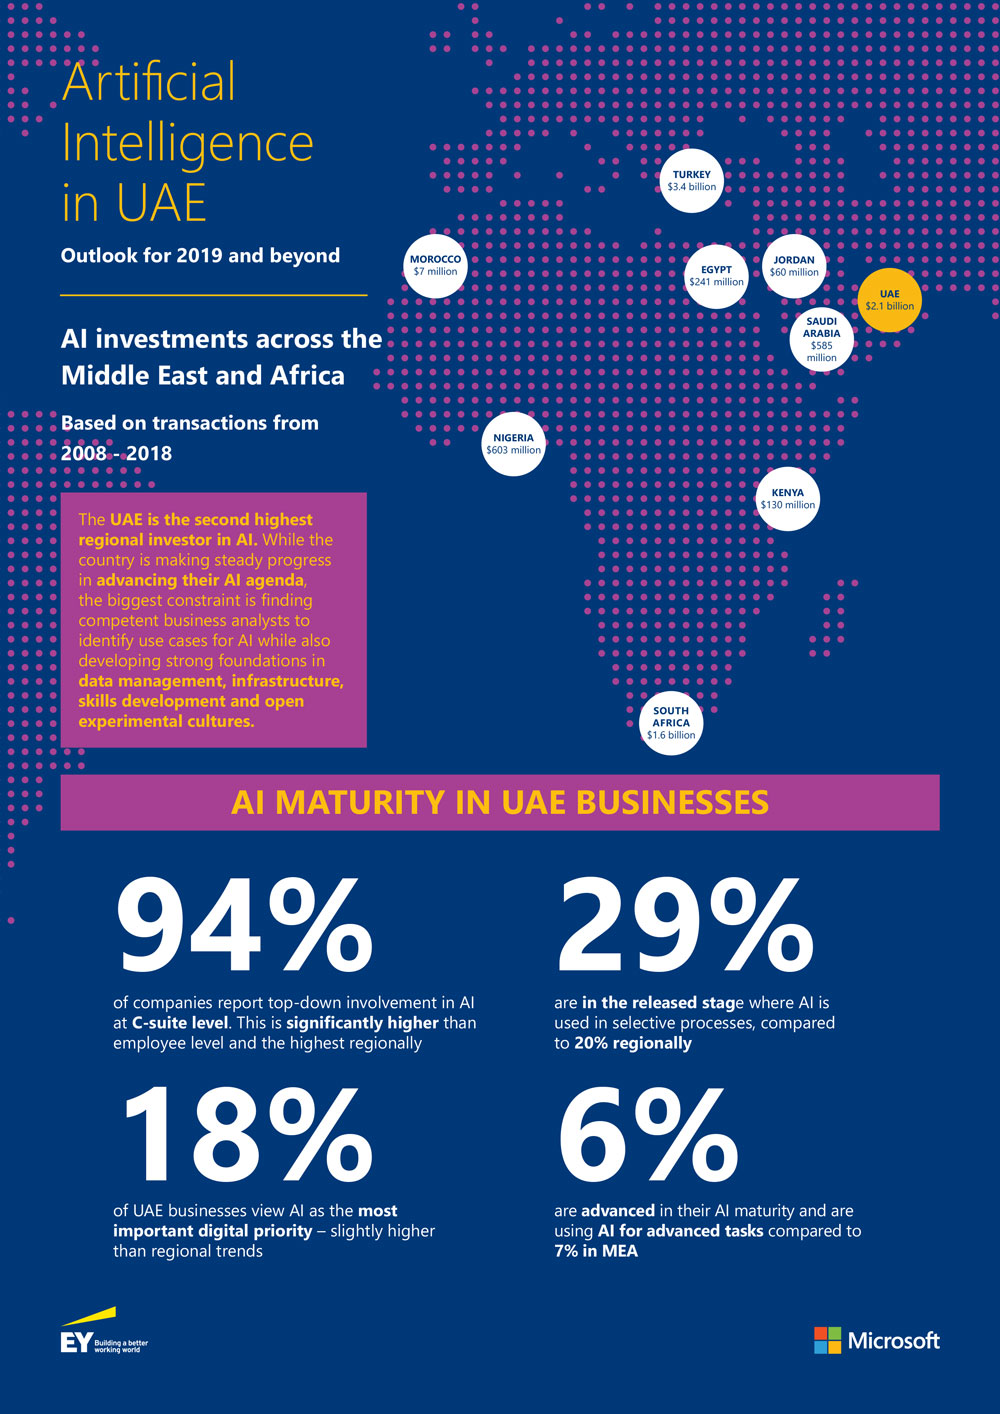 Artificial Intelligence infographic in the UAE